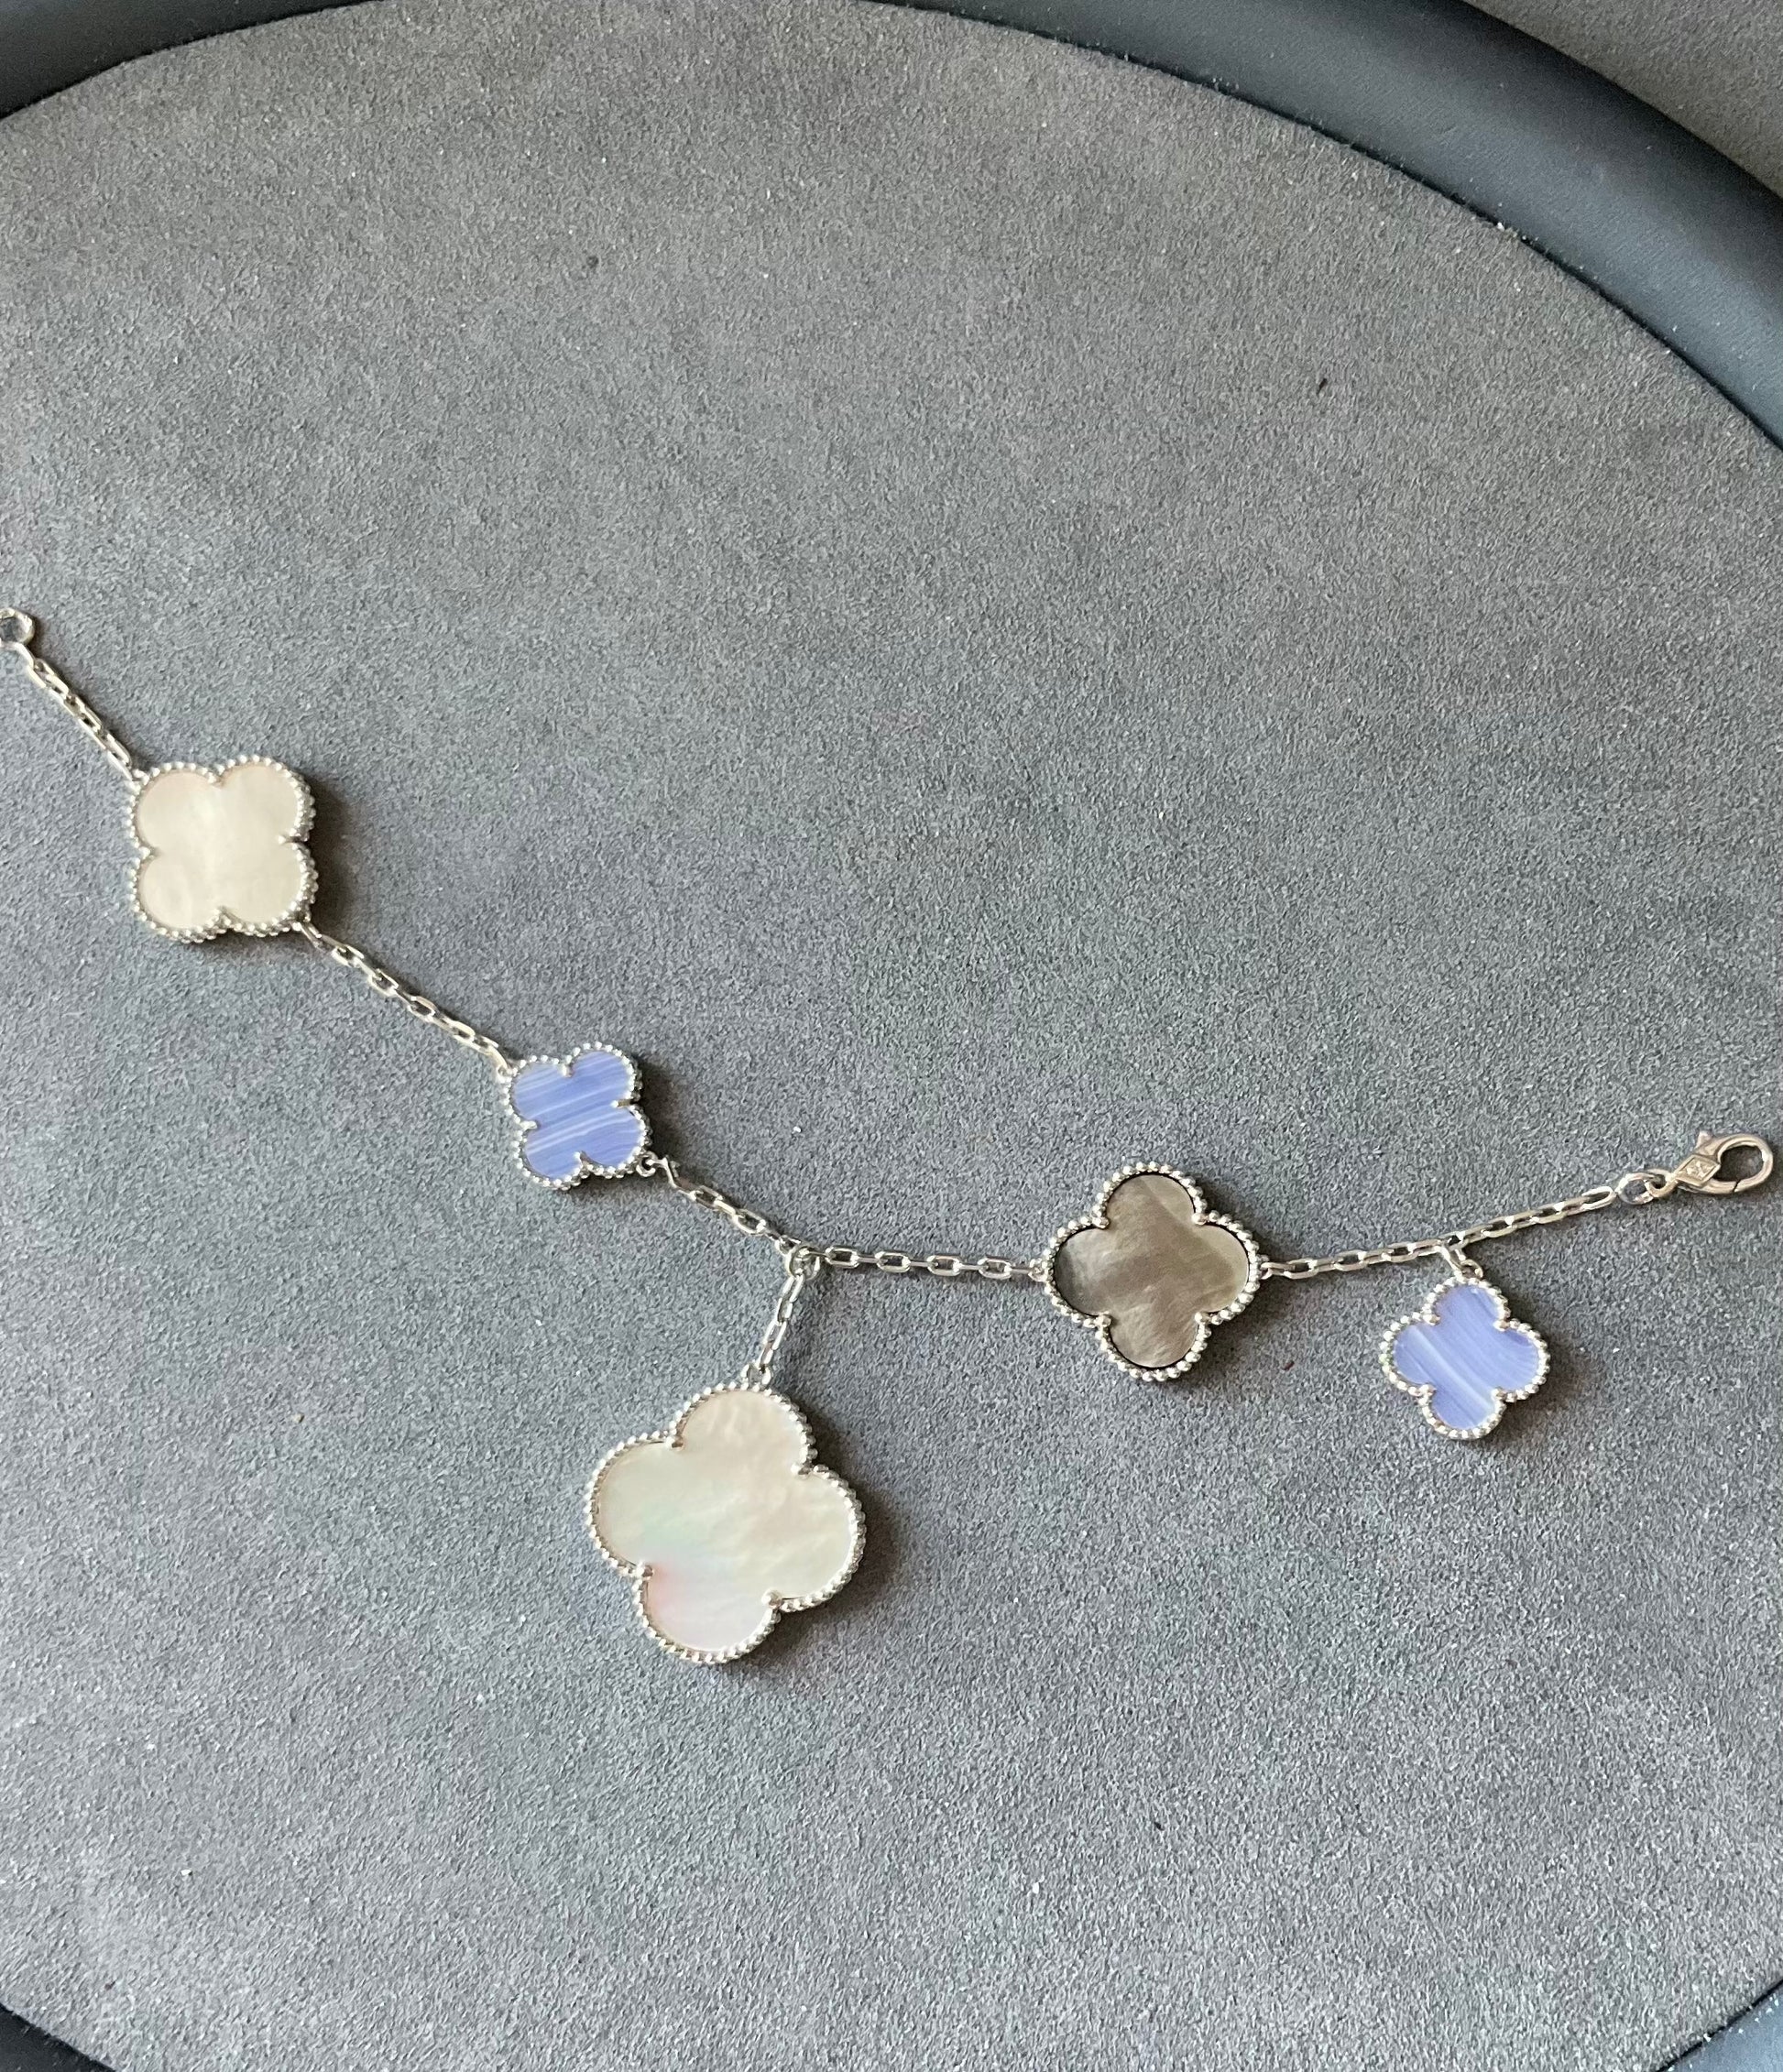 Mother of Pearl chalcedony Charm clover bracelet 925 silver 18k white gold plated 7.5 inches long - ParadiseKissCo